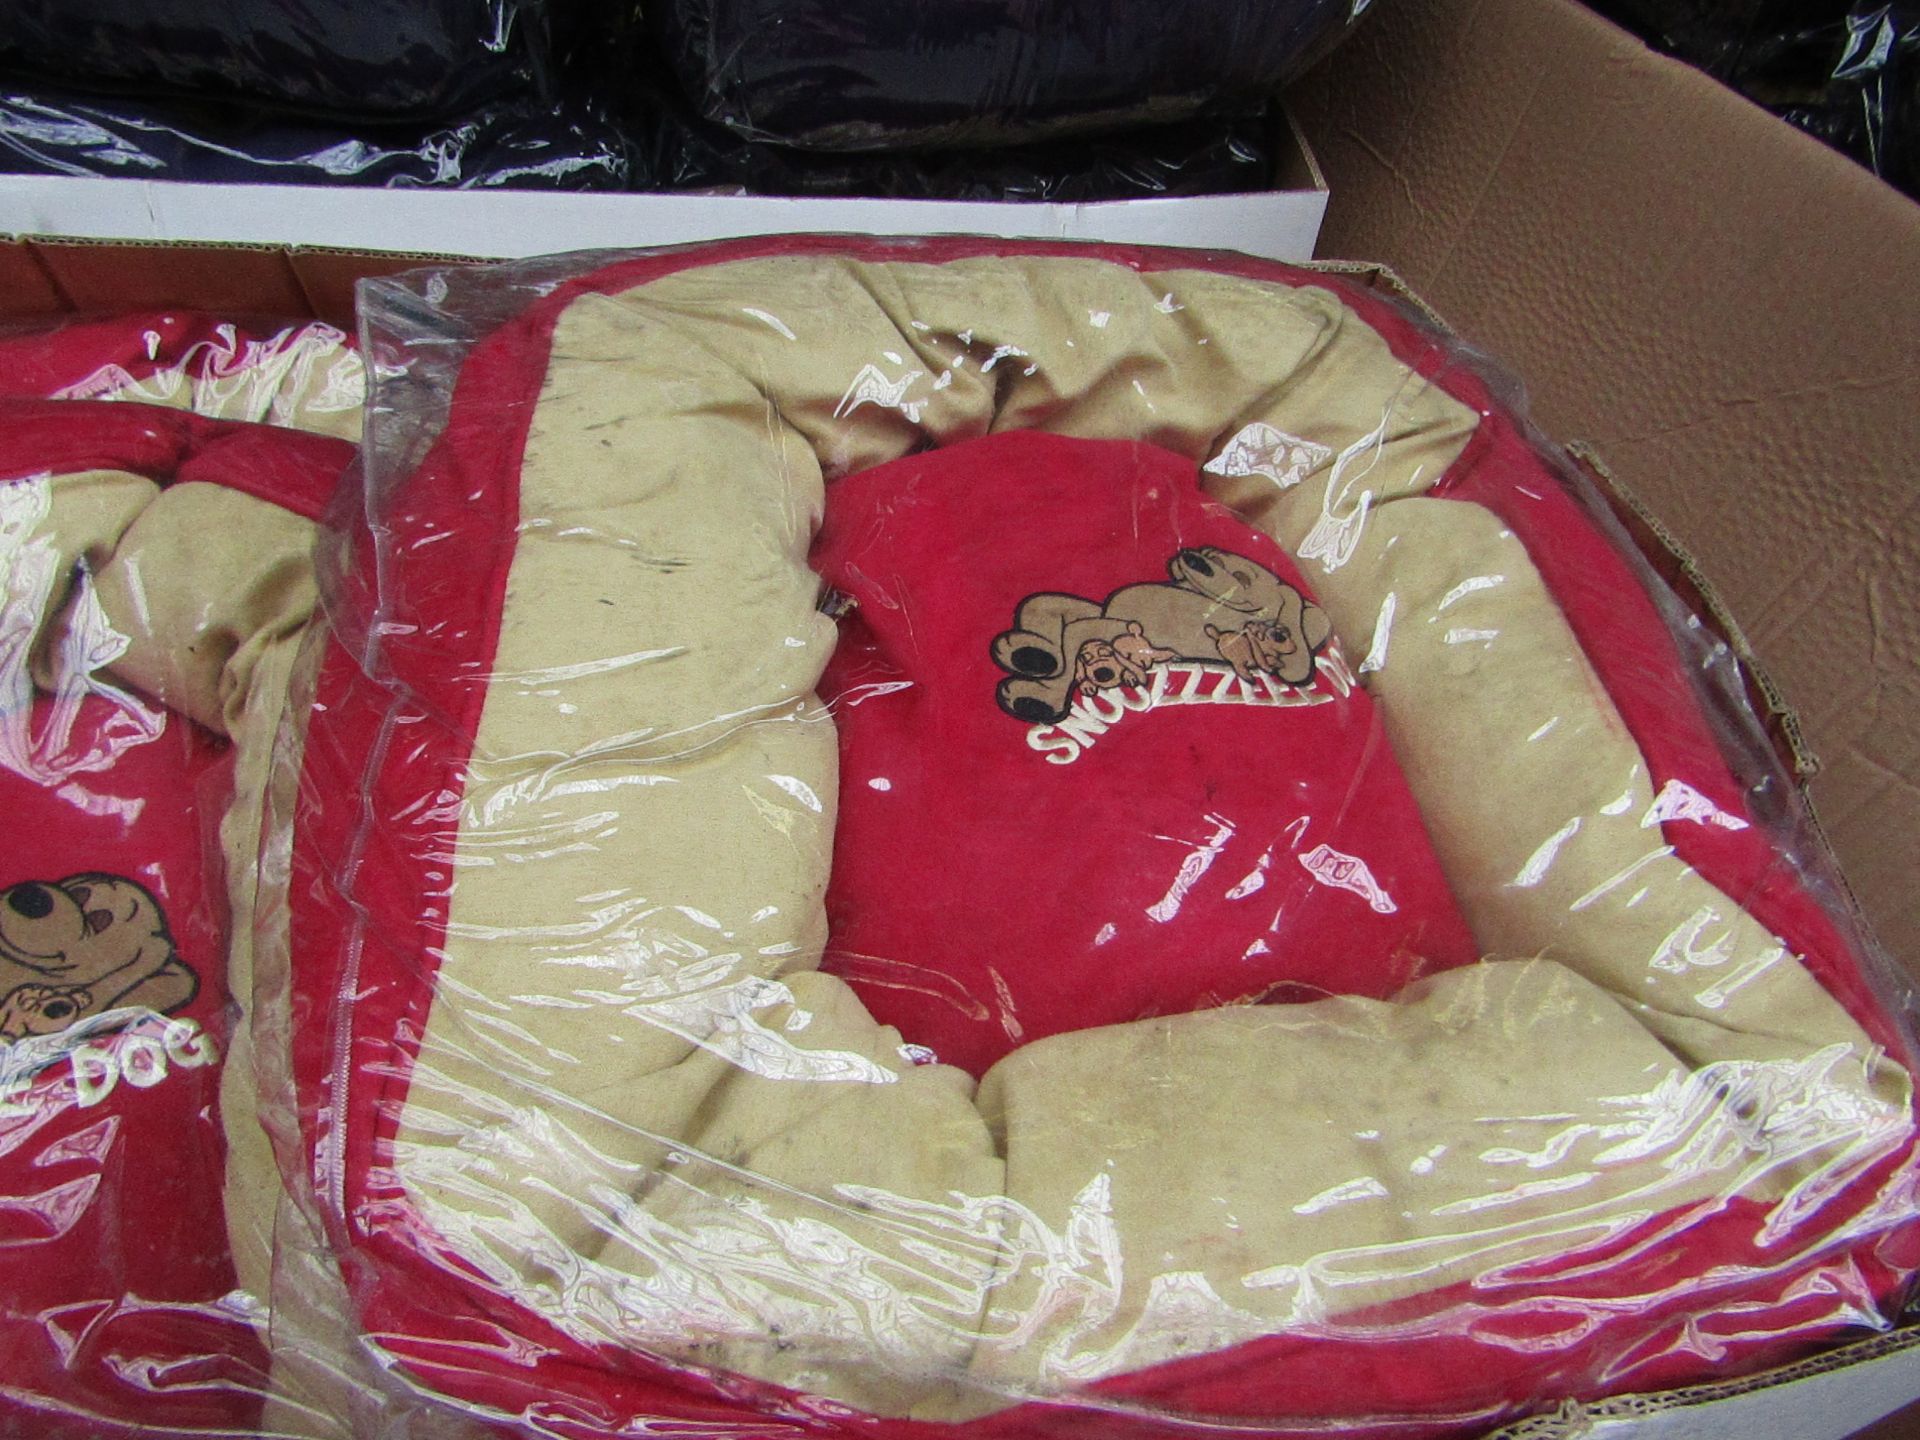 5x Snoozzzeee Dog - Cherry Red Donut Dog Bed (Size 1) - All New & Packaged.